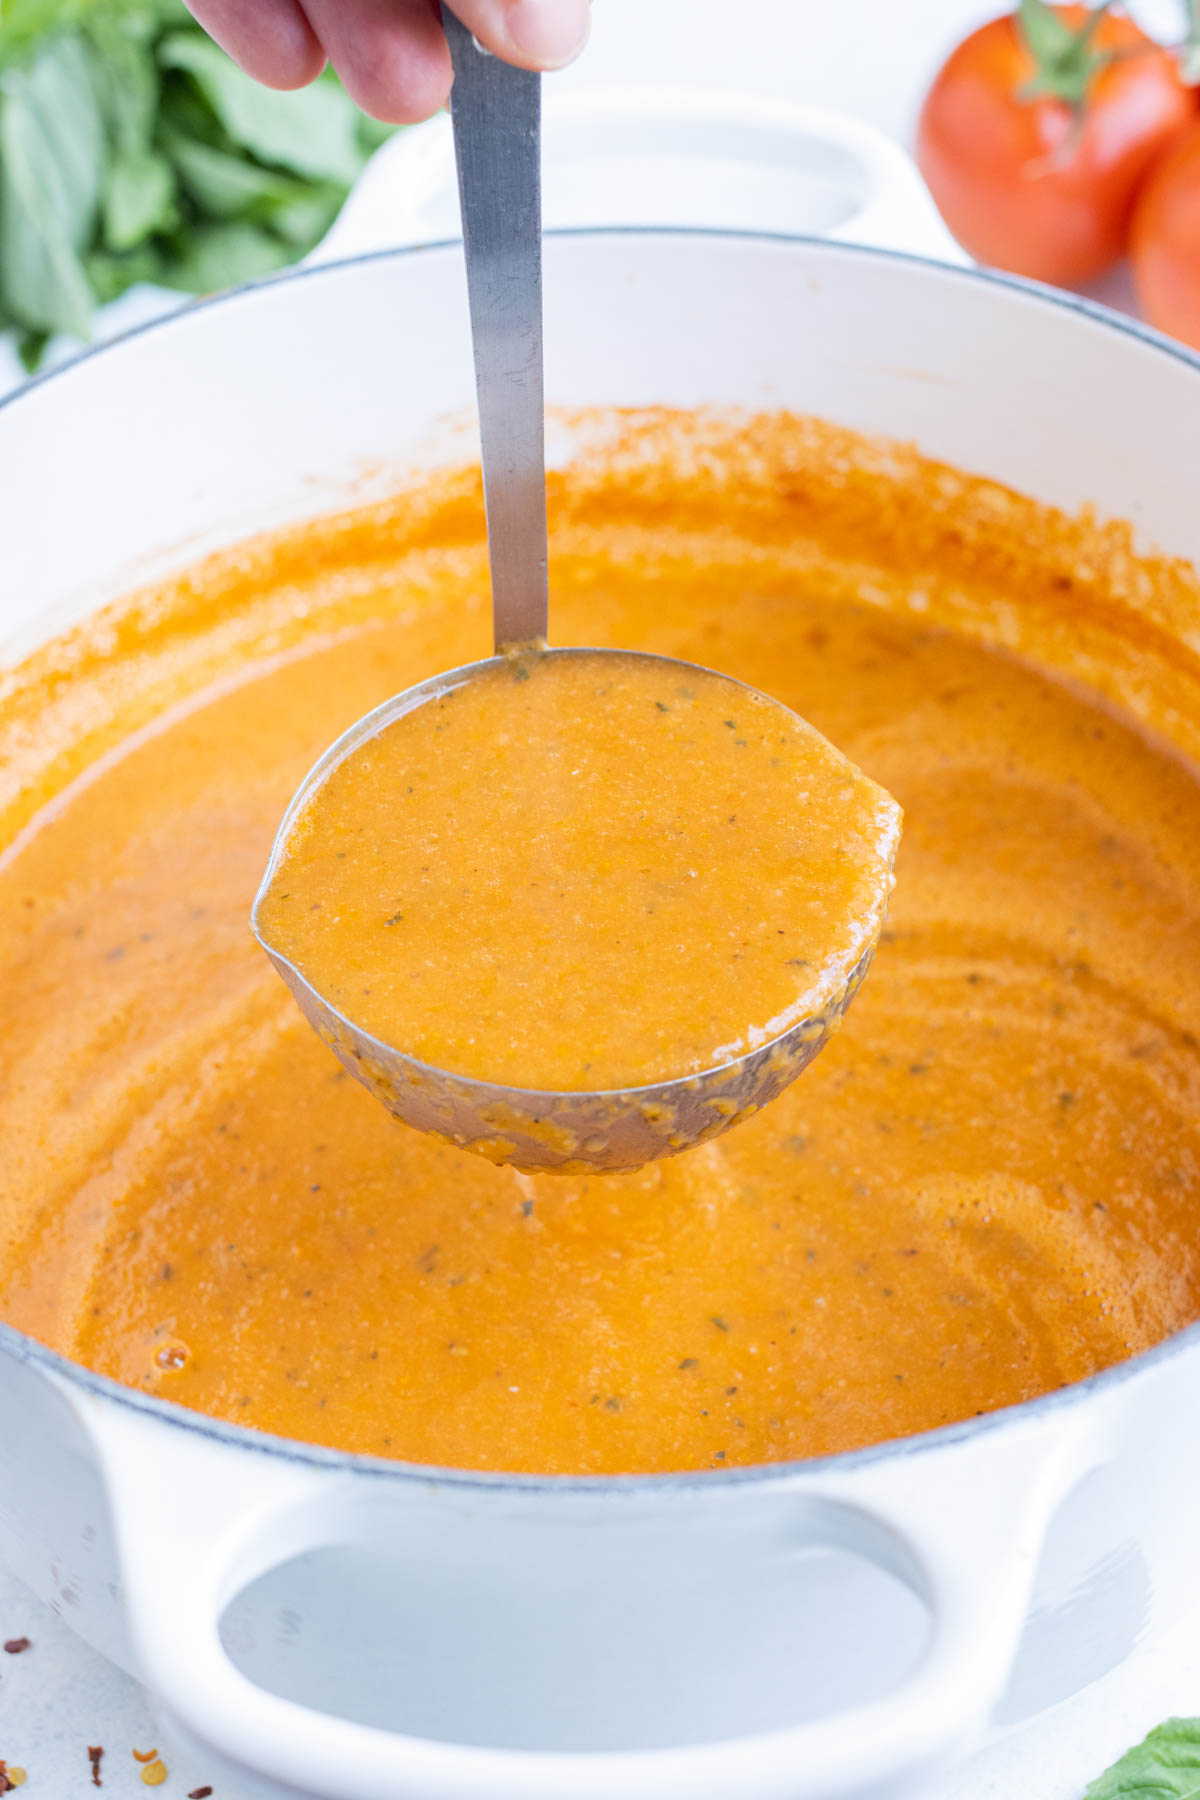 Creamy tomato basil bisque is a hearty fall dish.